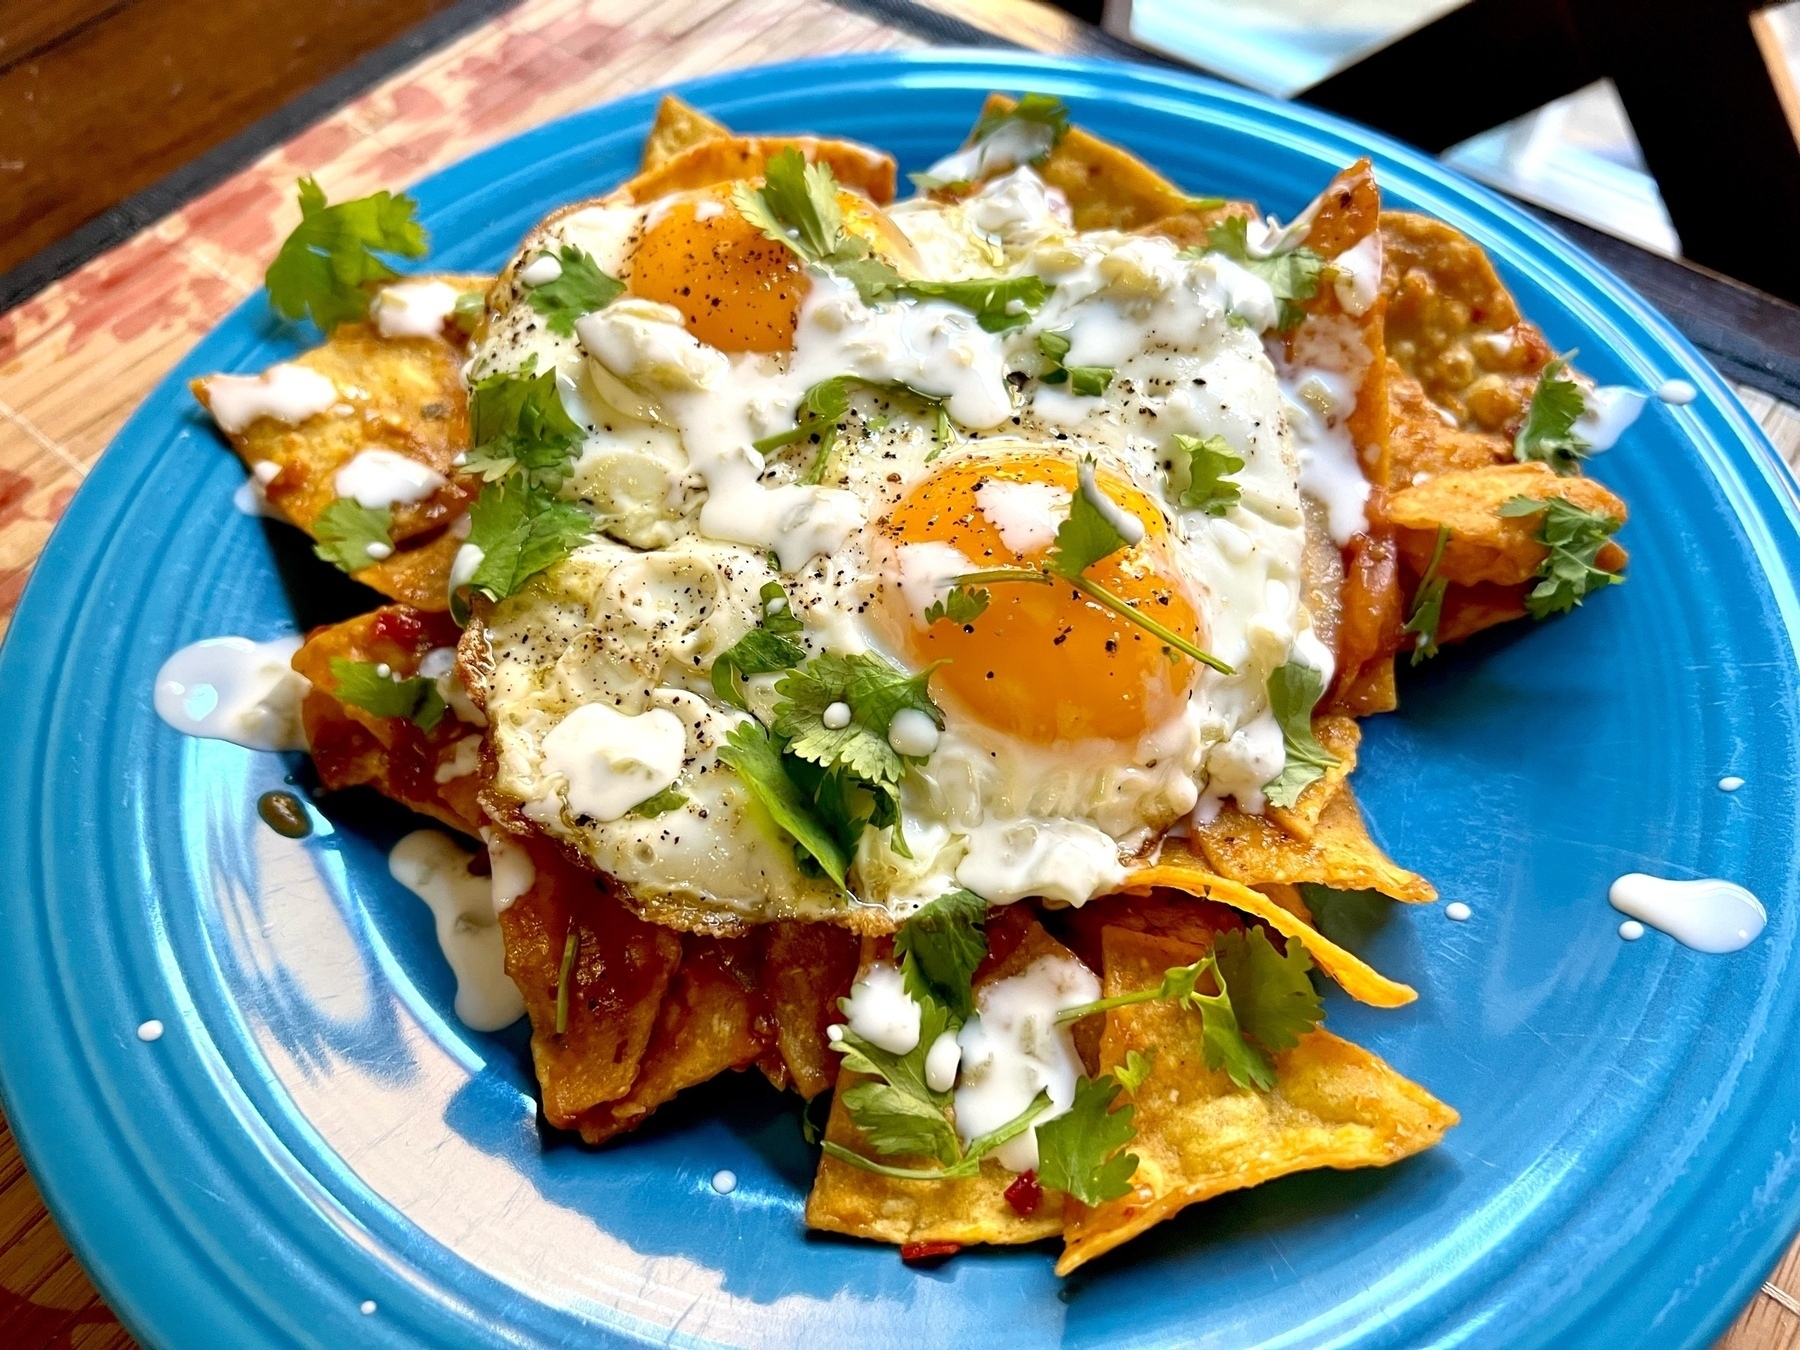 a serving of chilaquiles on a blue plate. corn tortilla chips lightly simmered in salsa, with two fried eggs served sunny side up on top. Sprinkled with chopped cilantro.  